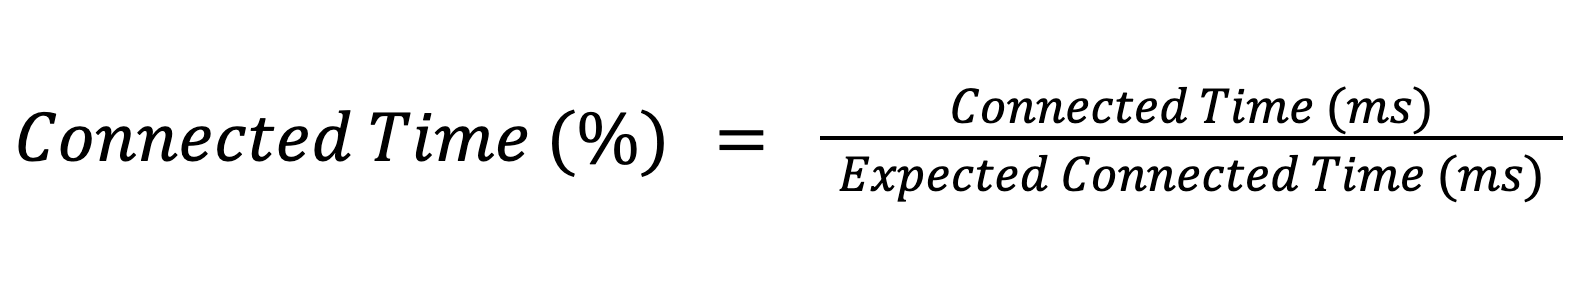 Equation for Connected Time metric